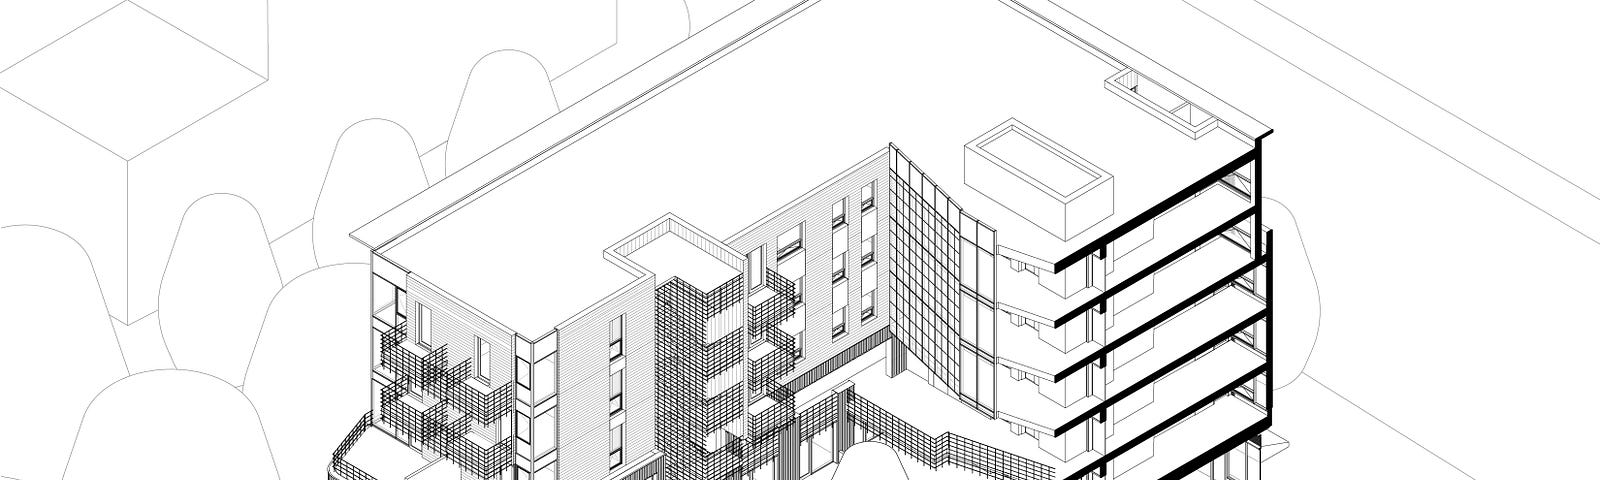 Cutaway of a multi-unit residential building with annotation of the social syntax Human Studio has developed